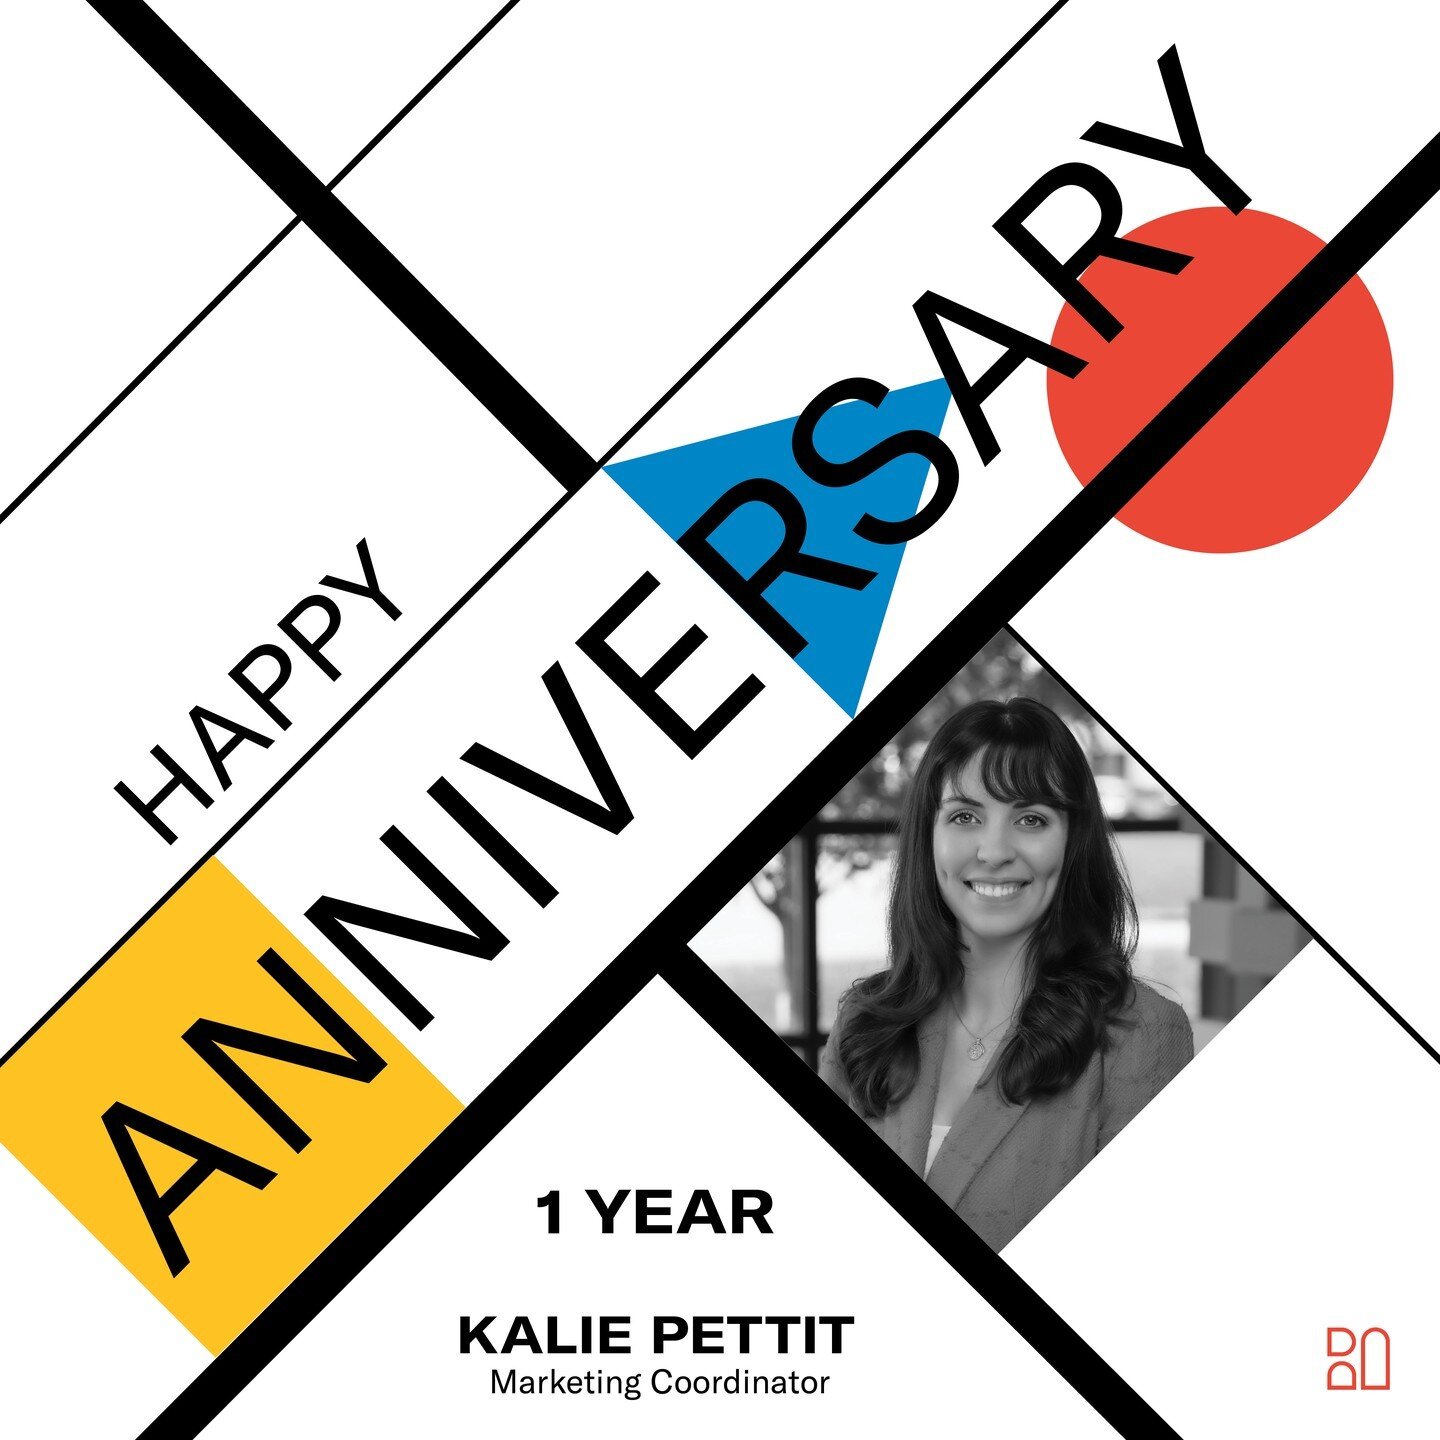 Please join us in congratulating Kalie on her April work anniversary. Thank you for being an essential part of DEBNER's success!

. . .

#thewayyouwork #bettertogether #workanniversary #millerknolldealer #houstonbusiness